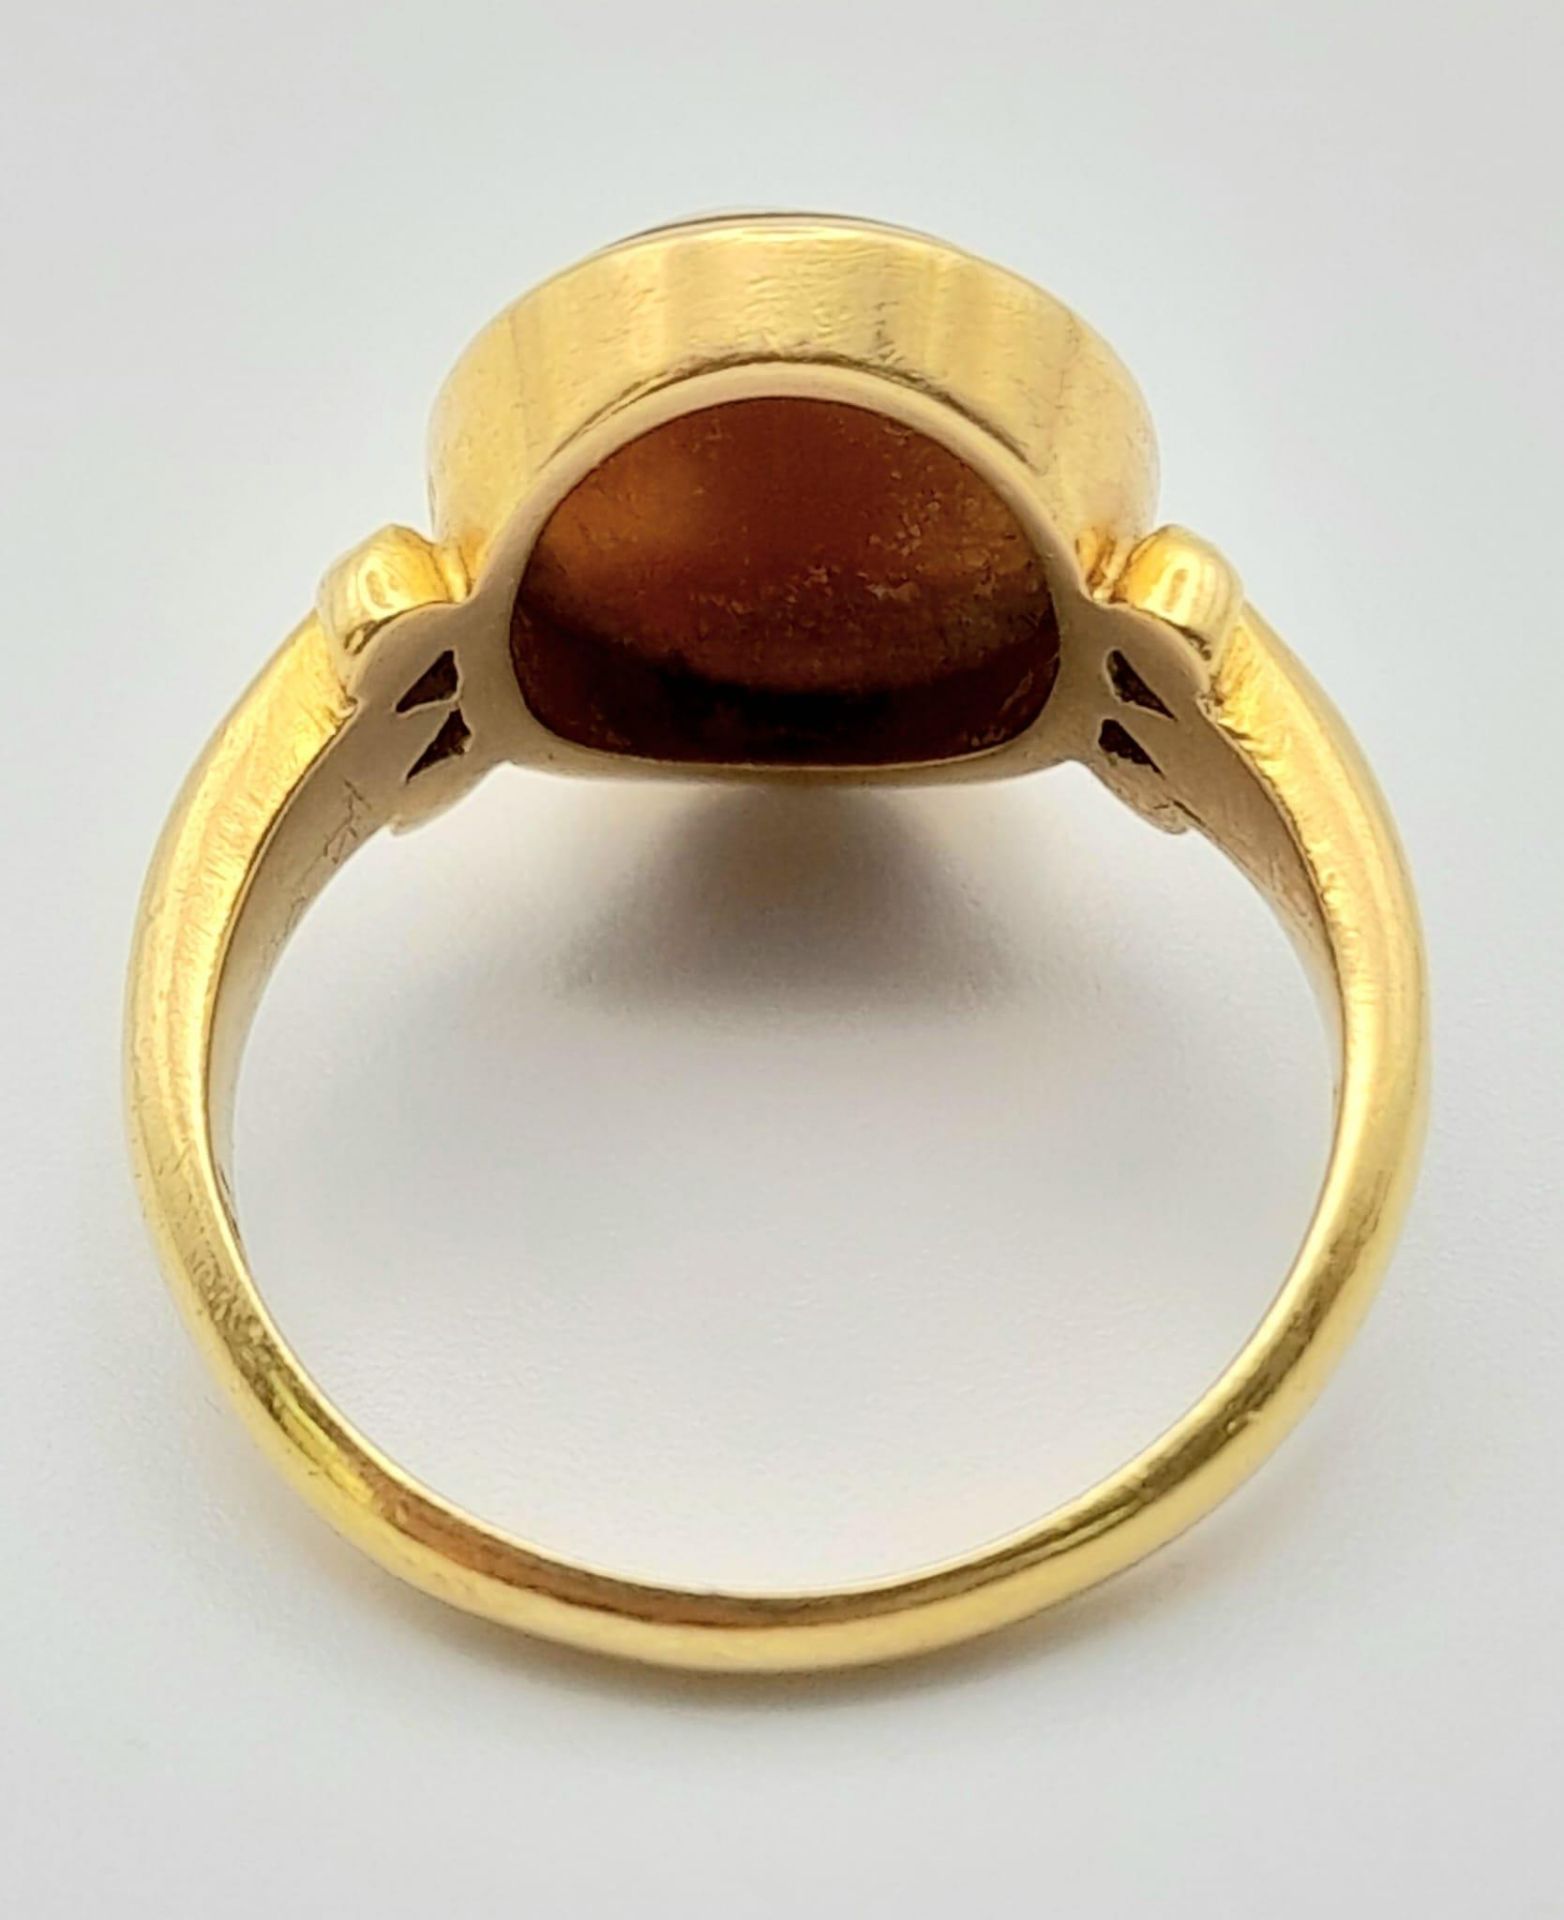 A Vintage 18K Yellow Gold Cameo Ring. Size N. 5.4g total weight. - Image 5 of 7